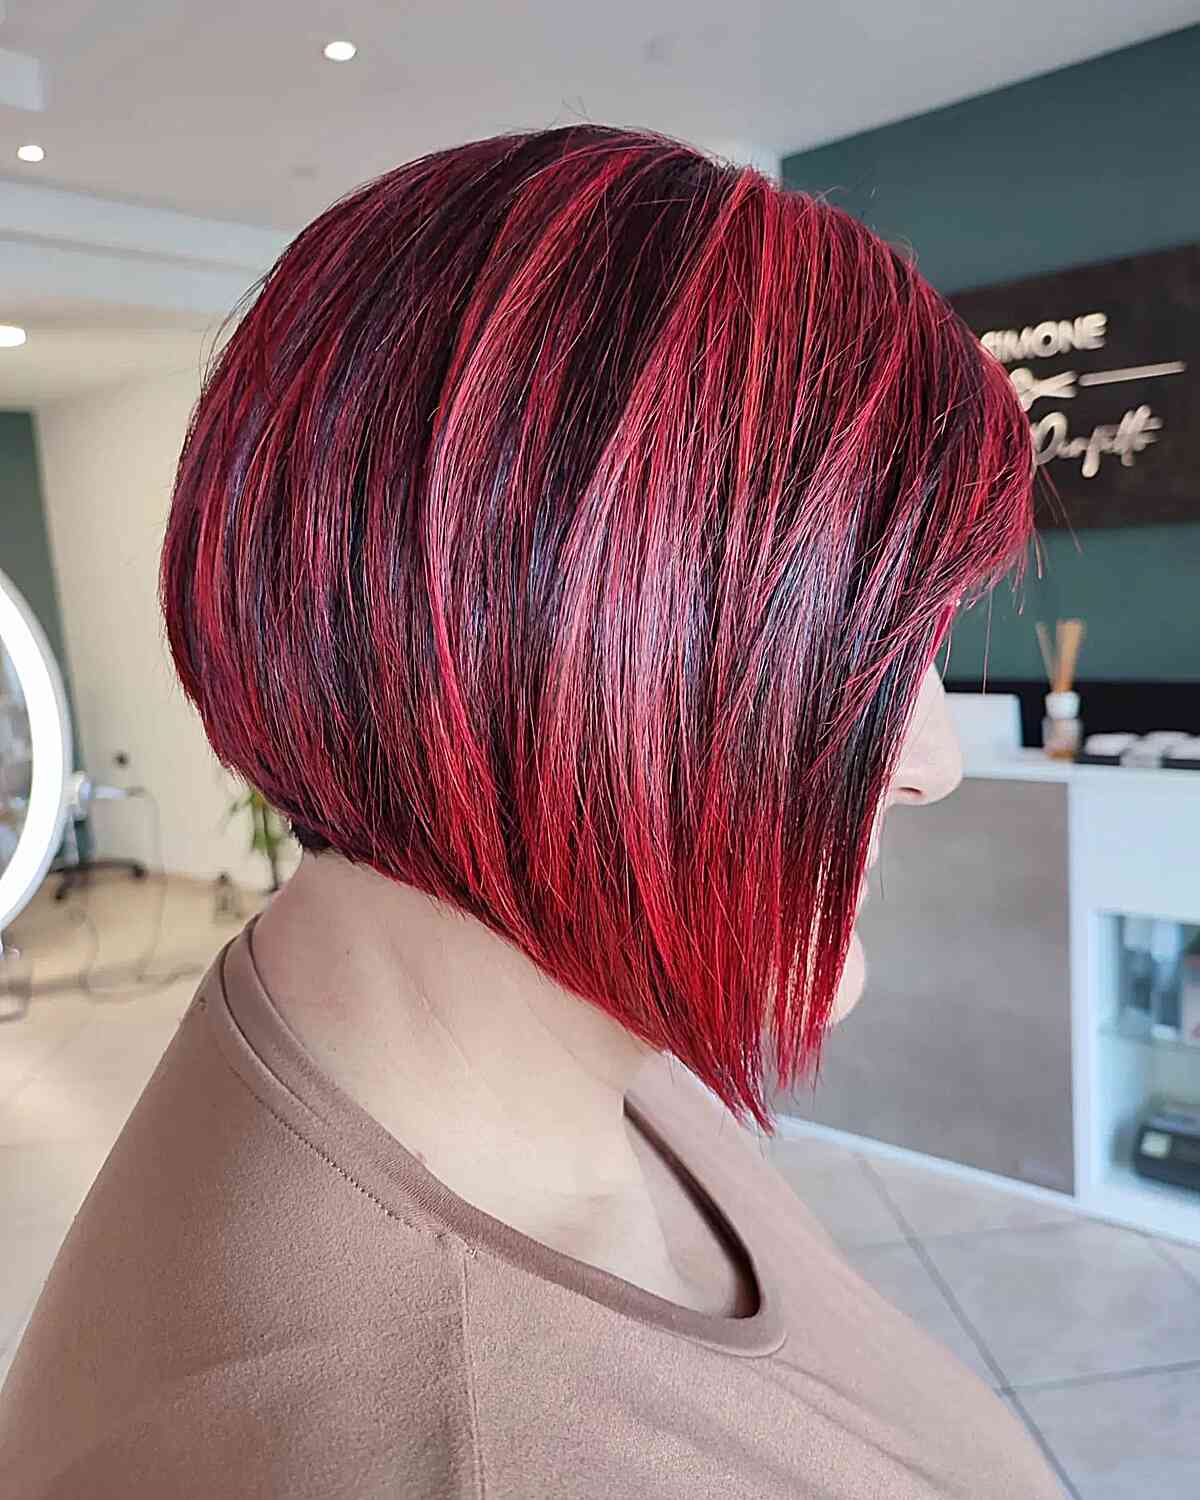 Tapered A-Line with Red Hair